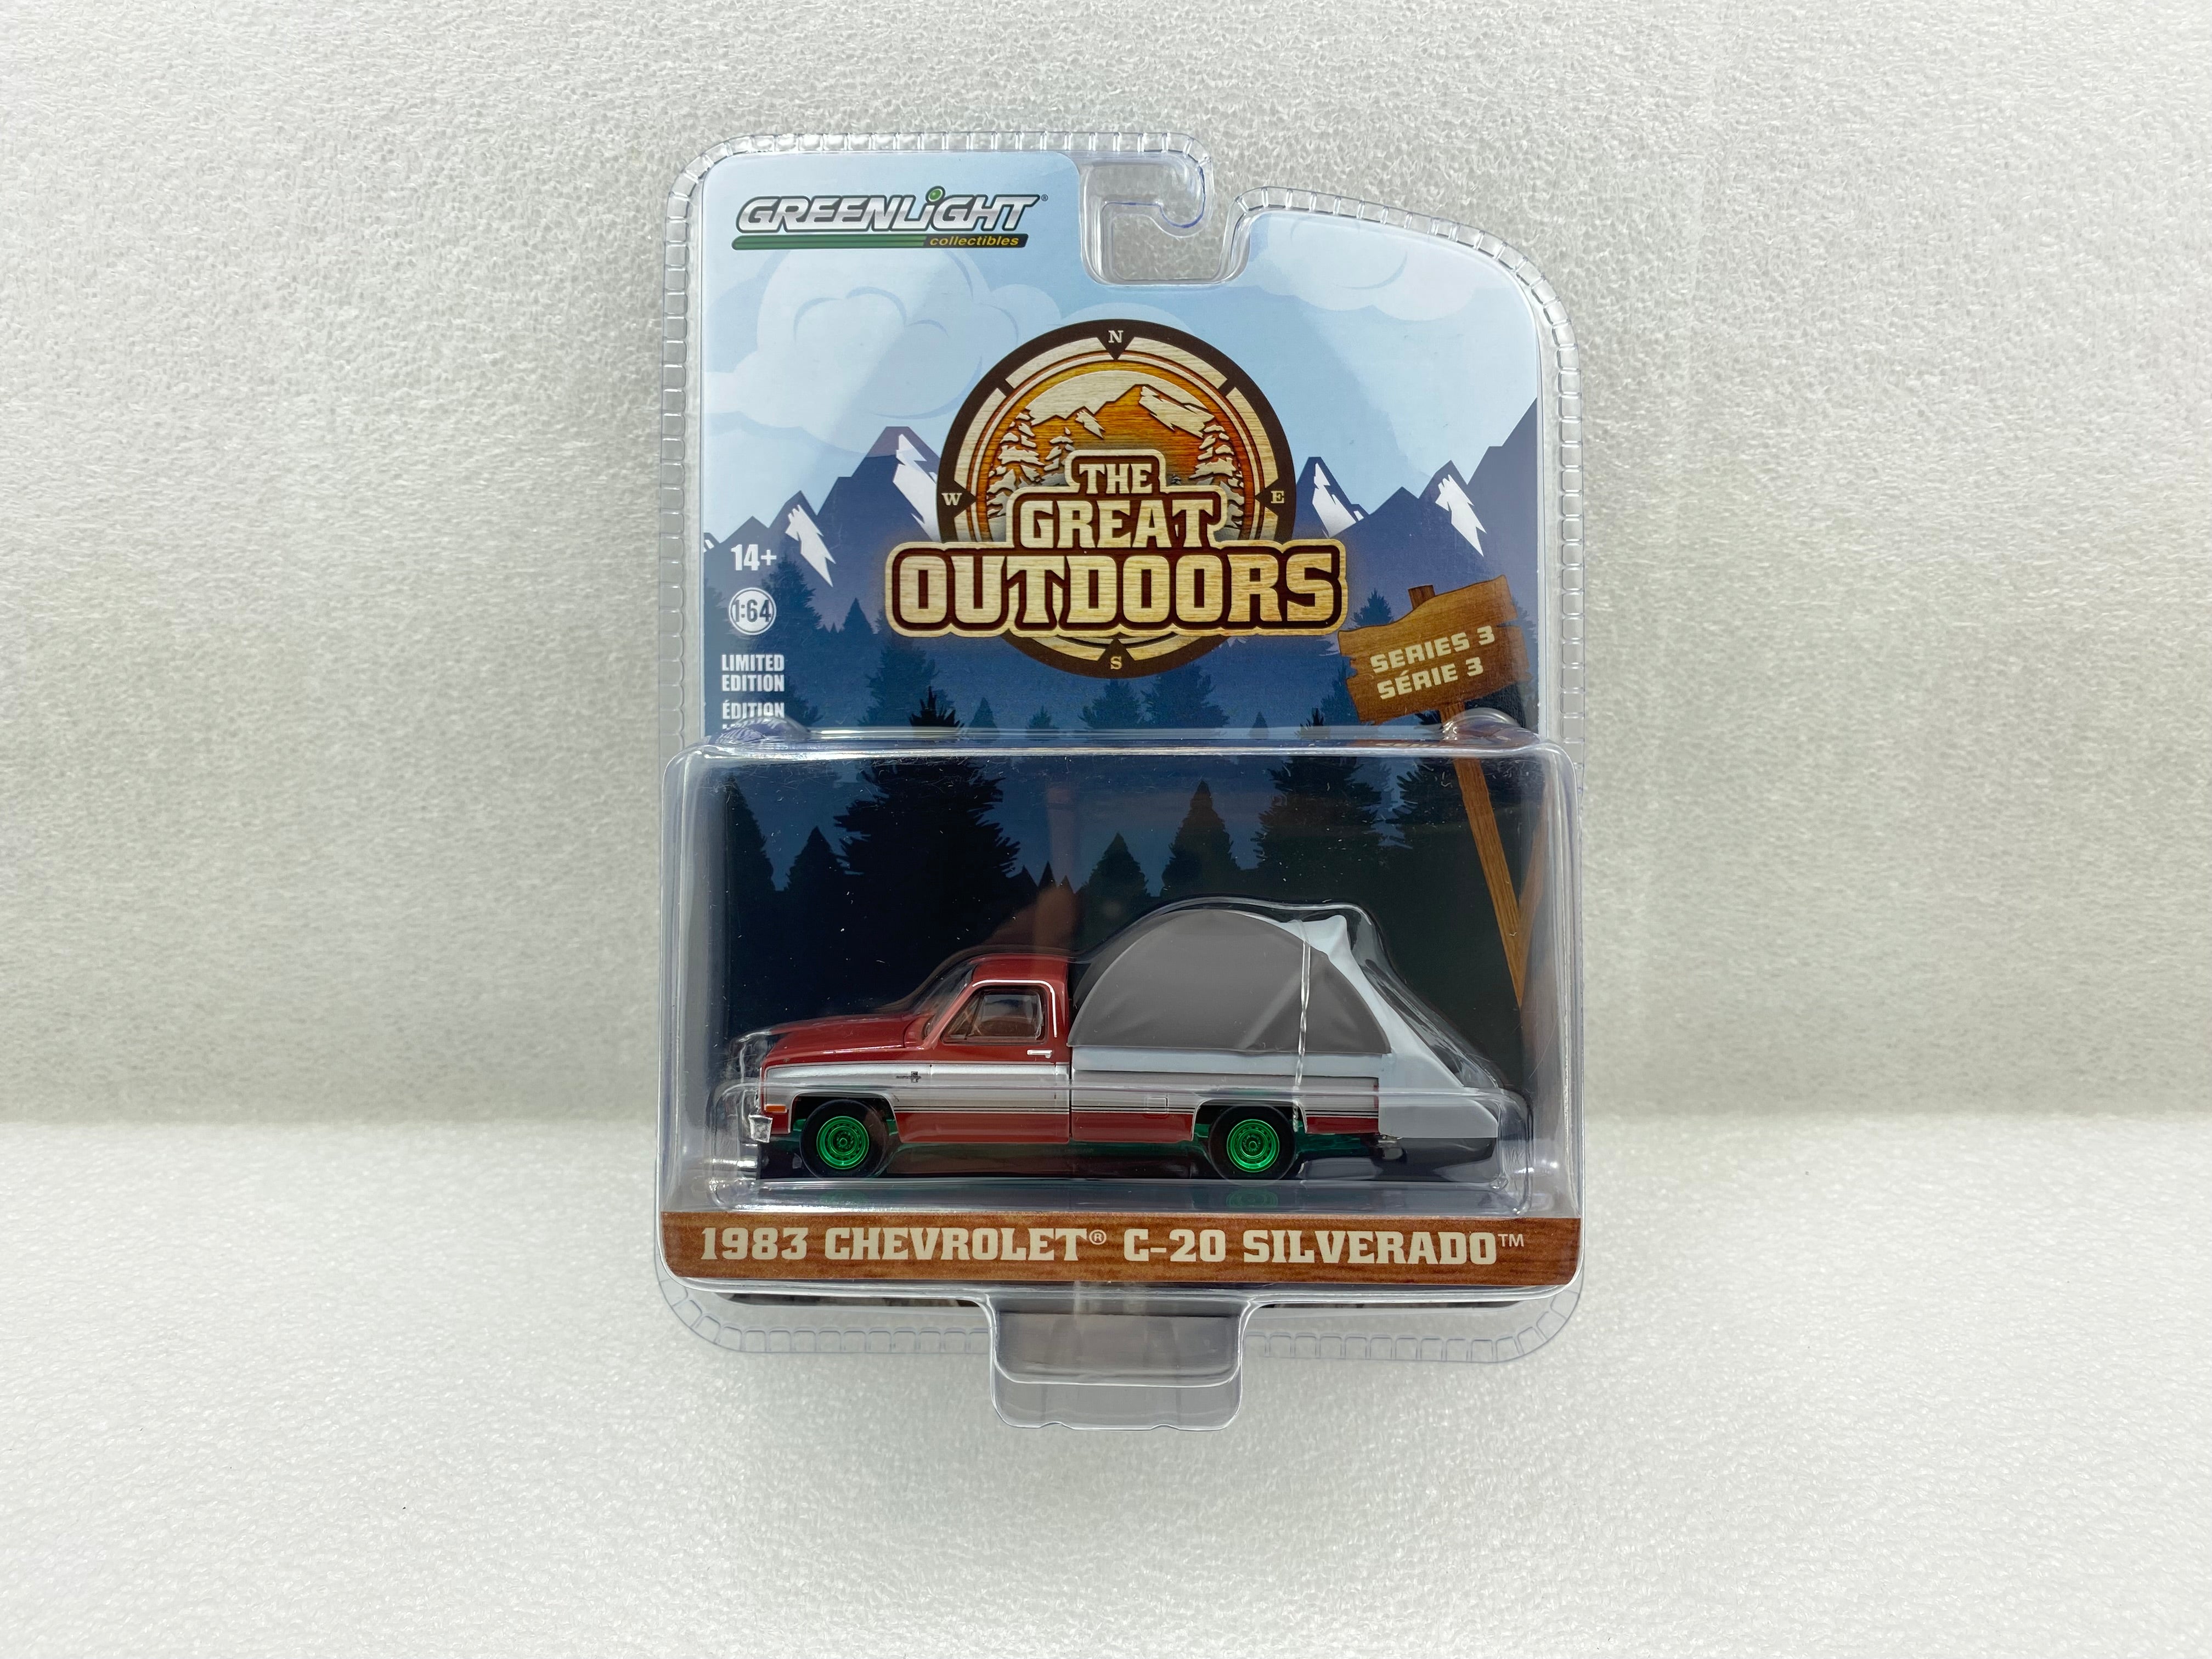 GreenLight Green Machine 1:64 The Great Outdoors Series 3 - 1983 Chevrolet  C20 Silverado - Carmine Red and Silver Metallic with Modern Truck Bed Tent 